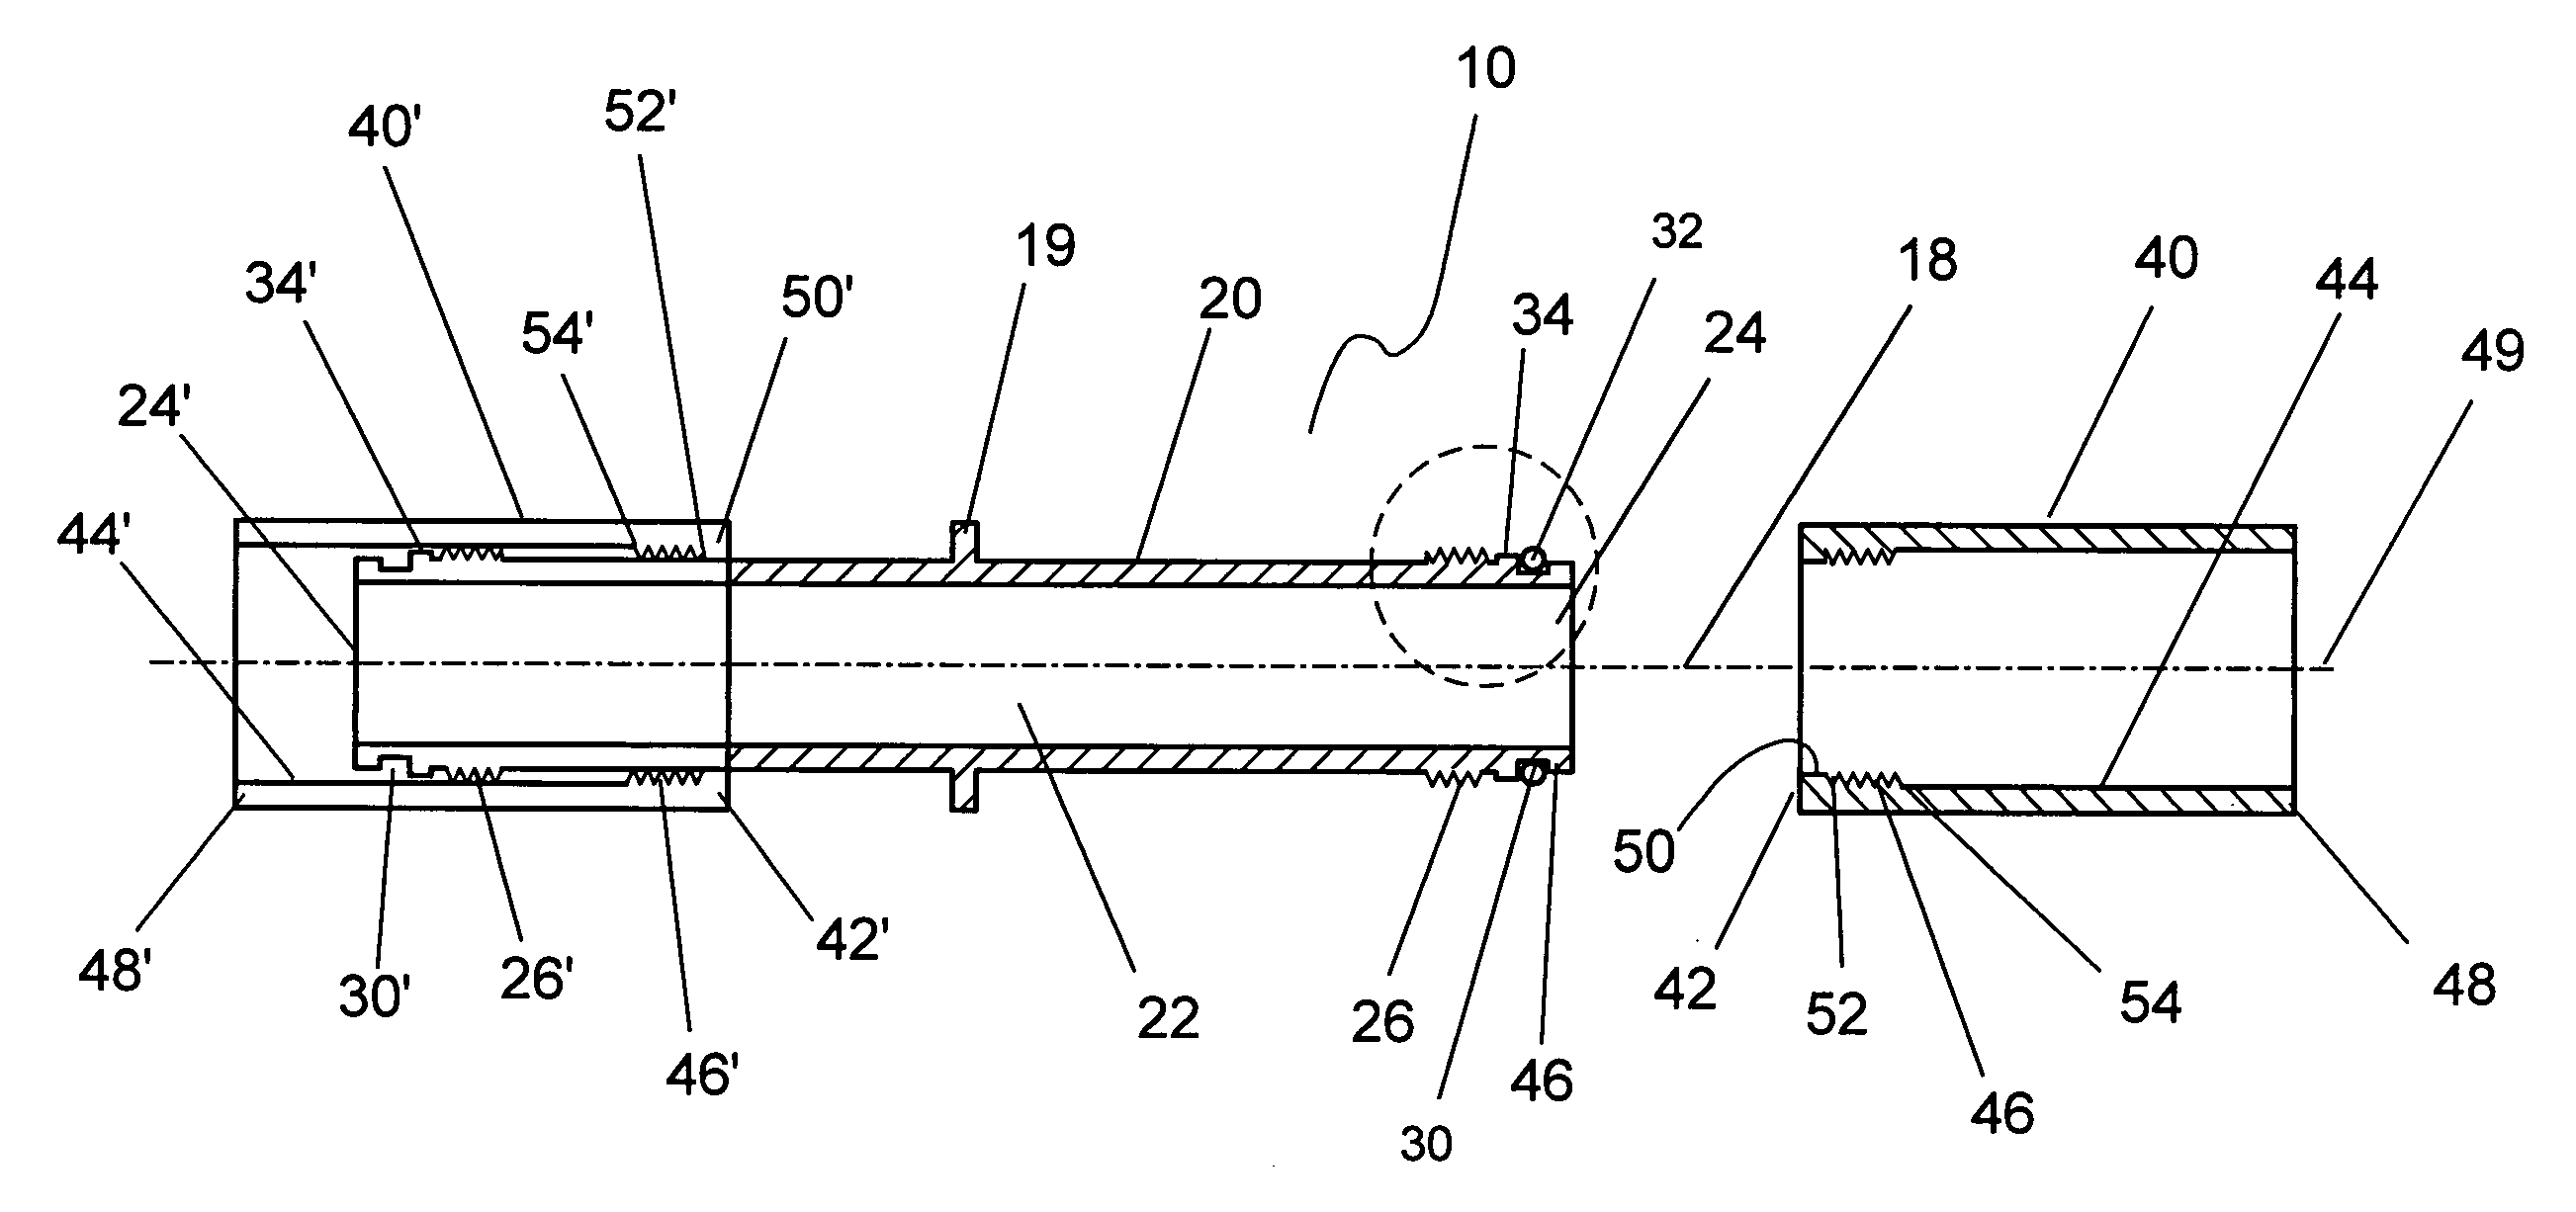 Slide coupling fitting for connecting conduits